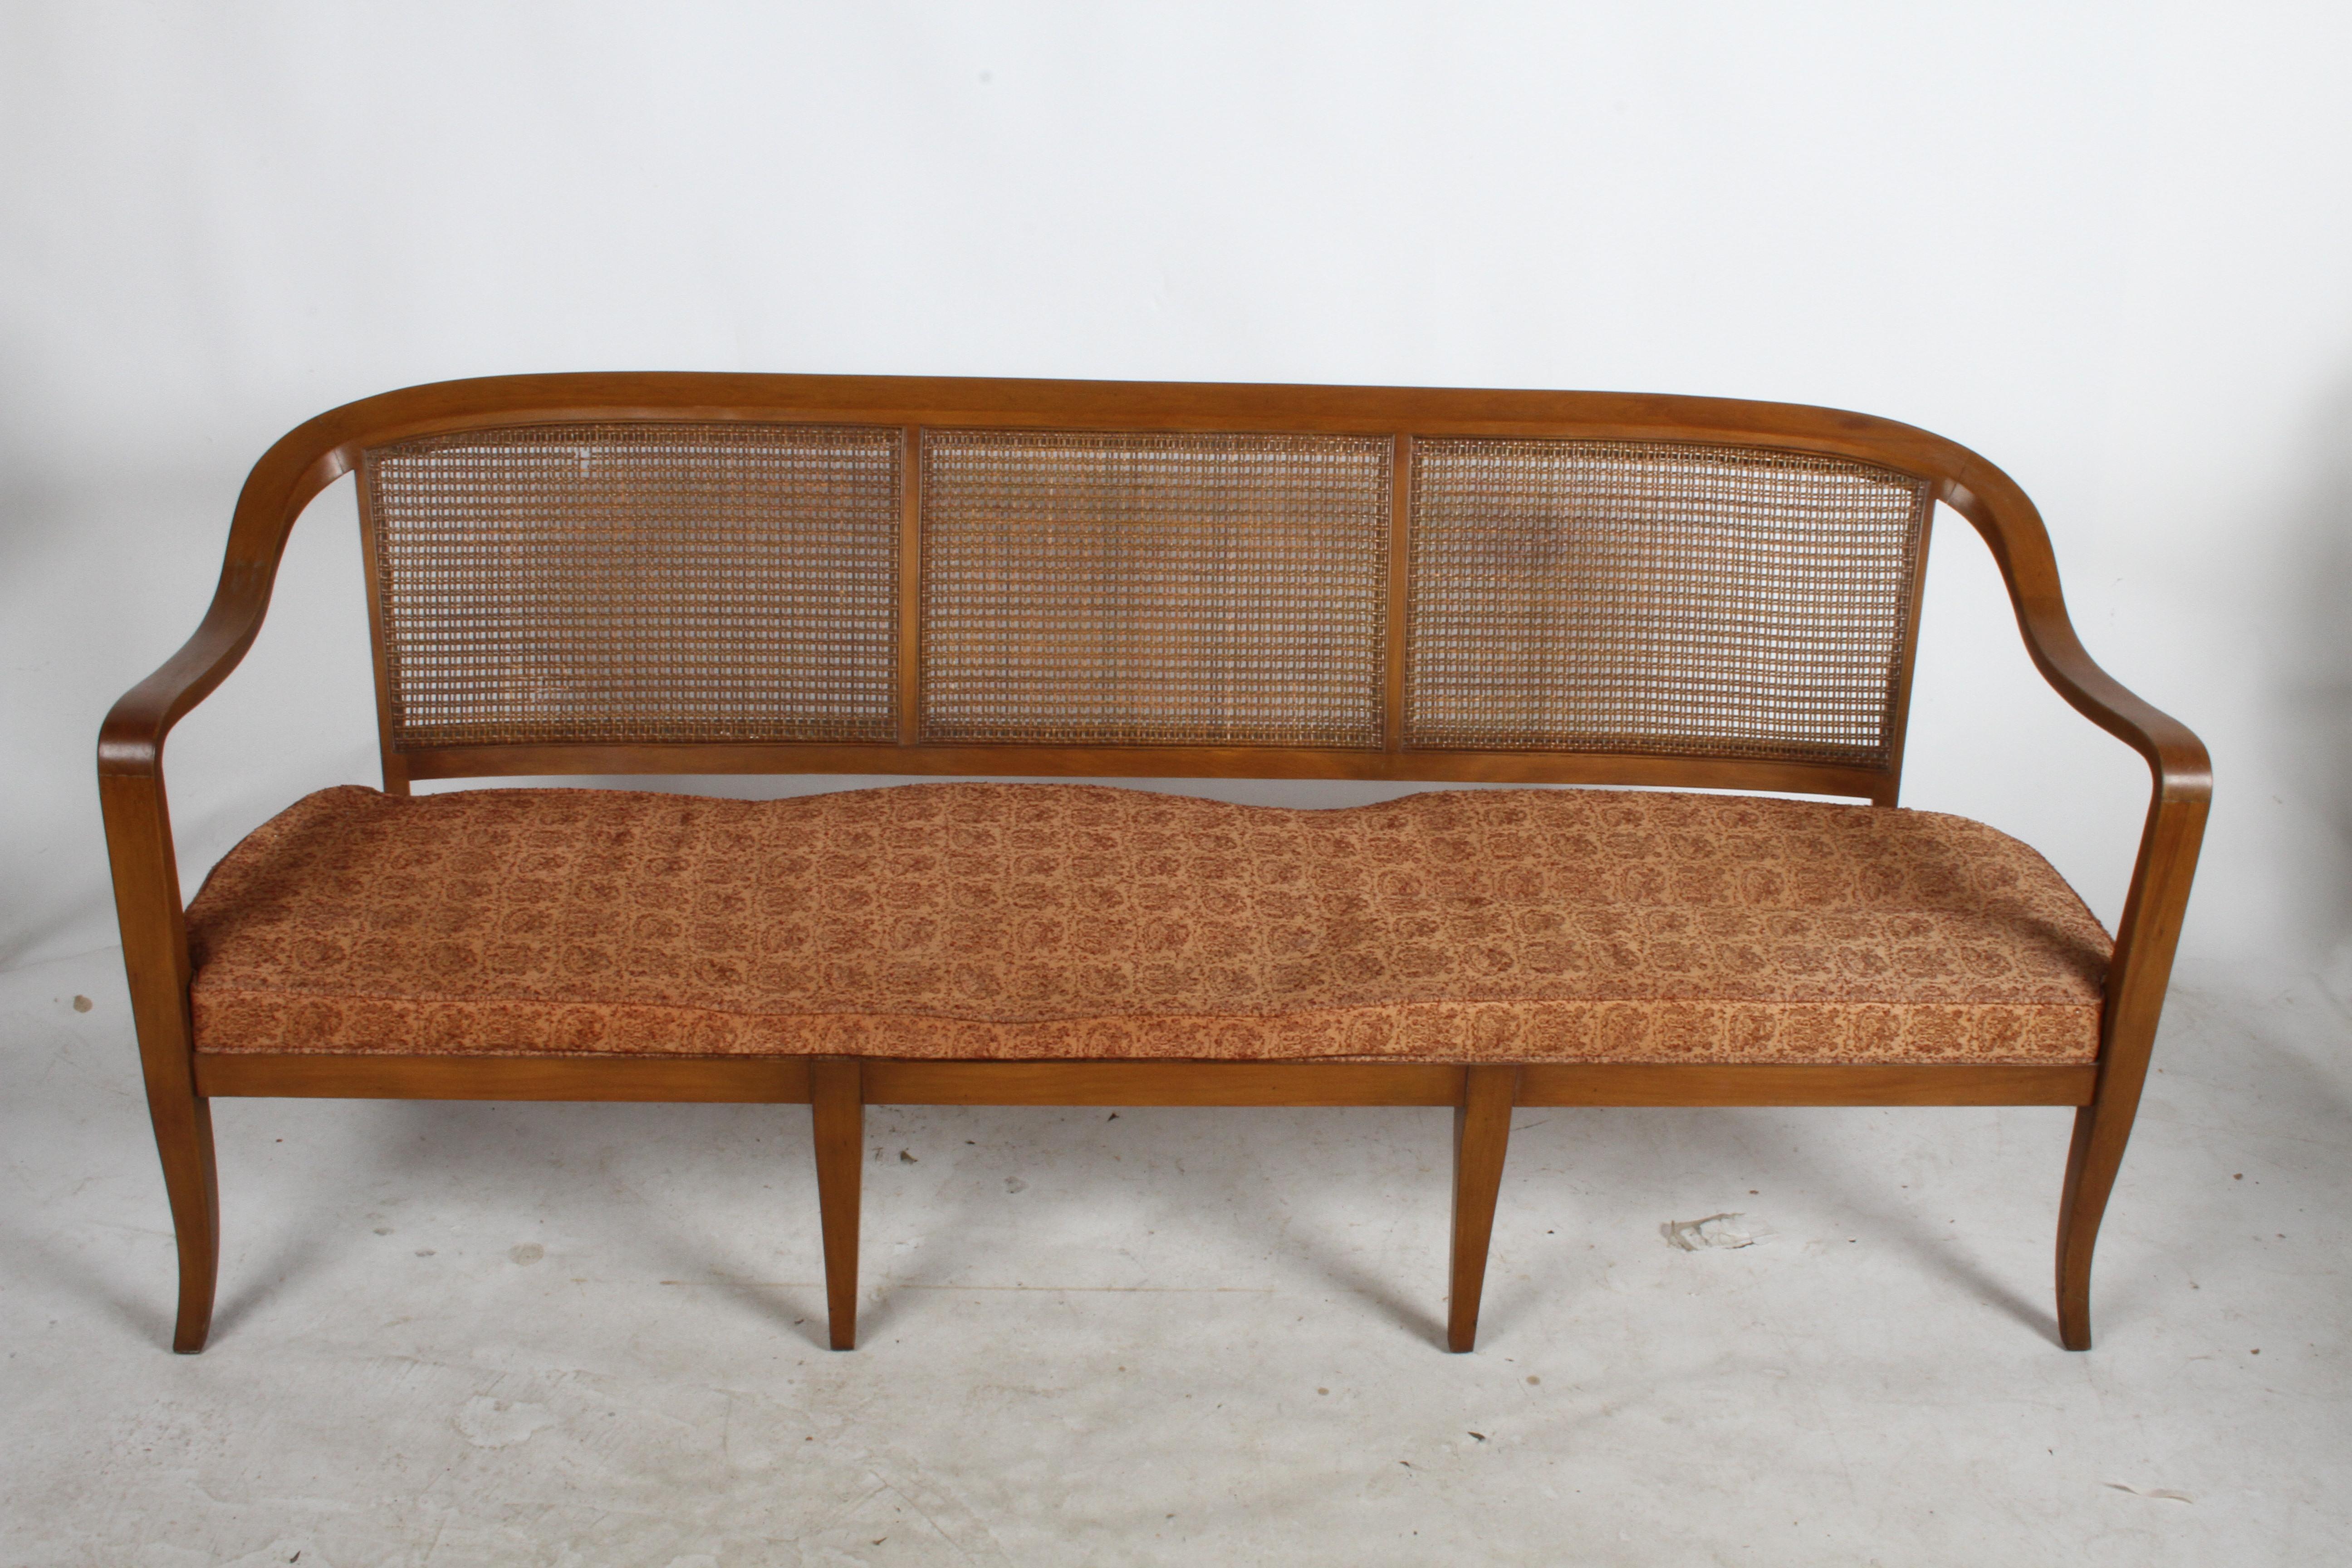 American Edward Wormley for Dunbar Style Cane Bentwood Bench or Sofa